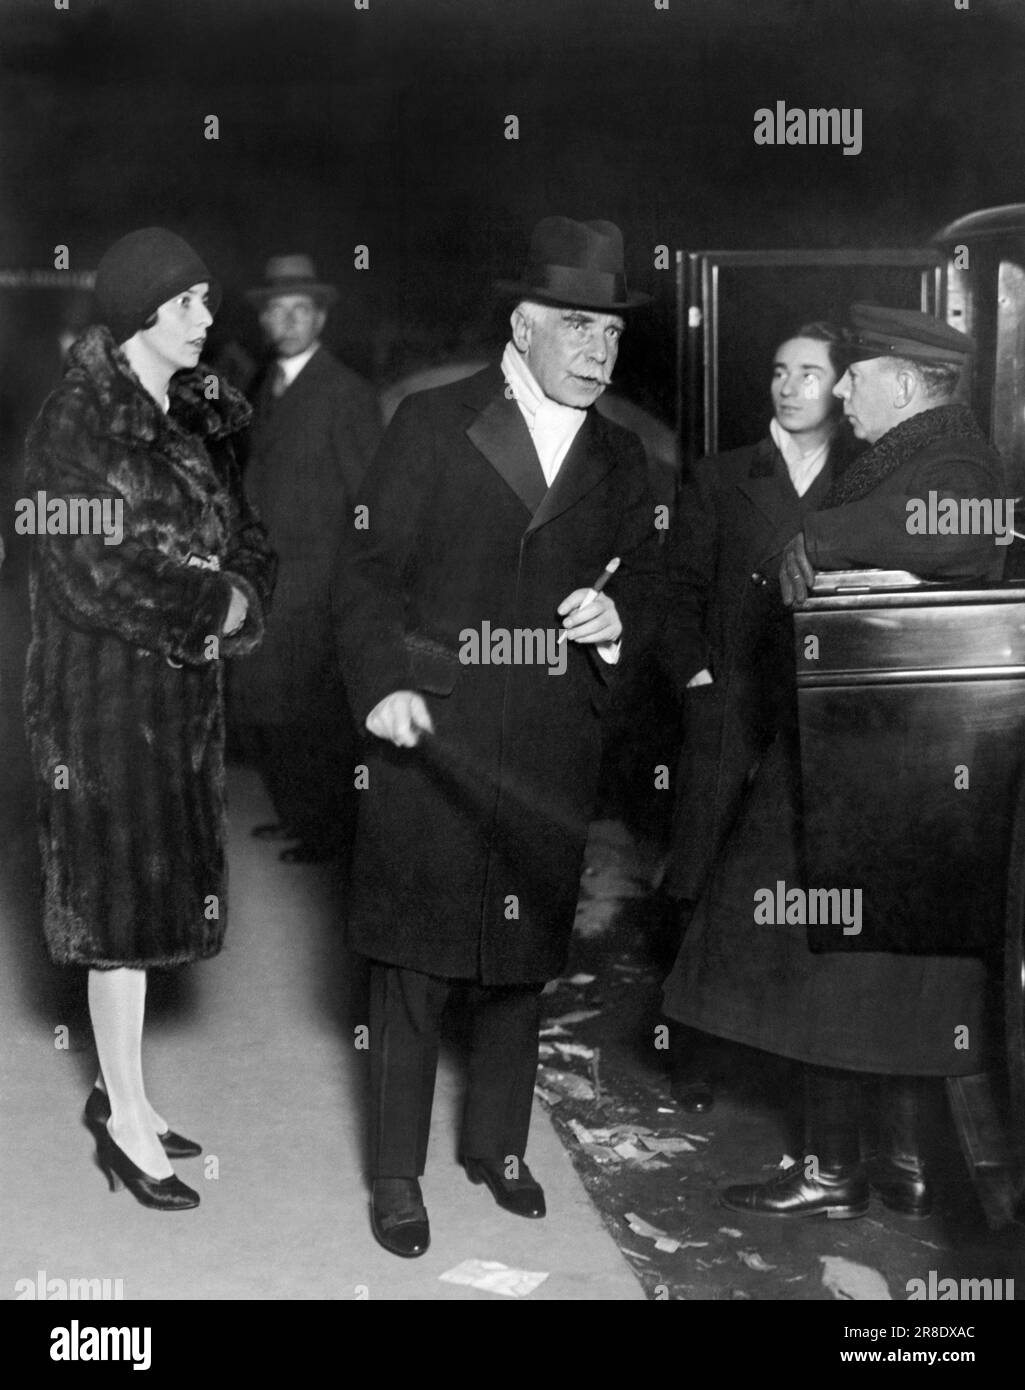 New York, New York:  c. 1929 Financier and banker Otto Kahn arrives with his daughter to attend the six day bicycle races being held at Madison Square Garden. Stock Photo